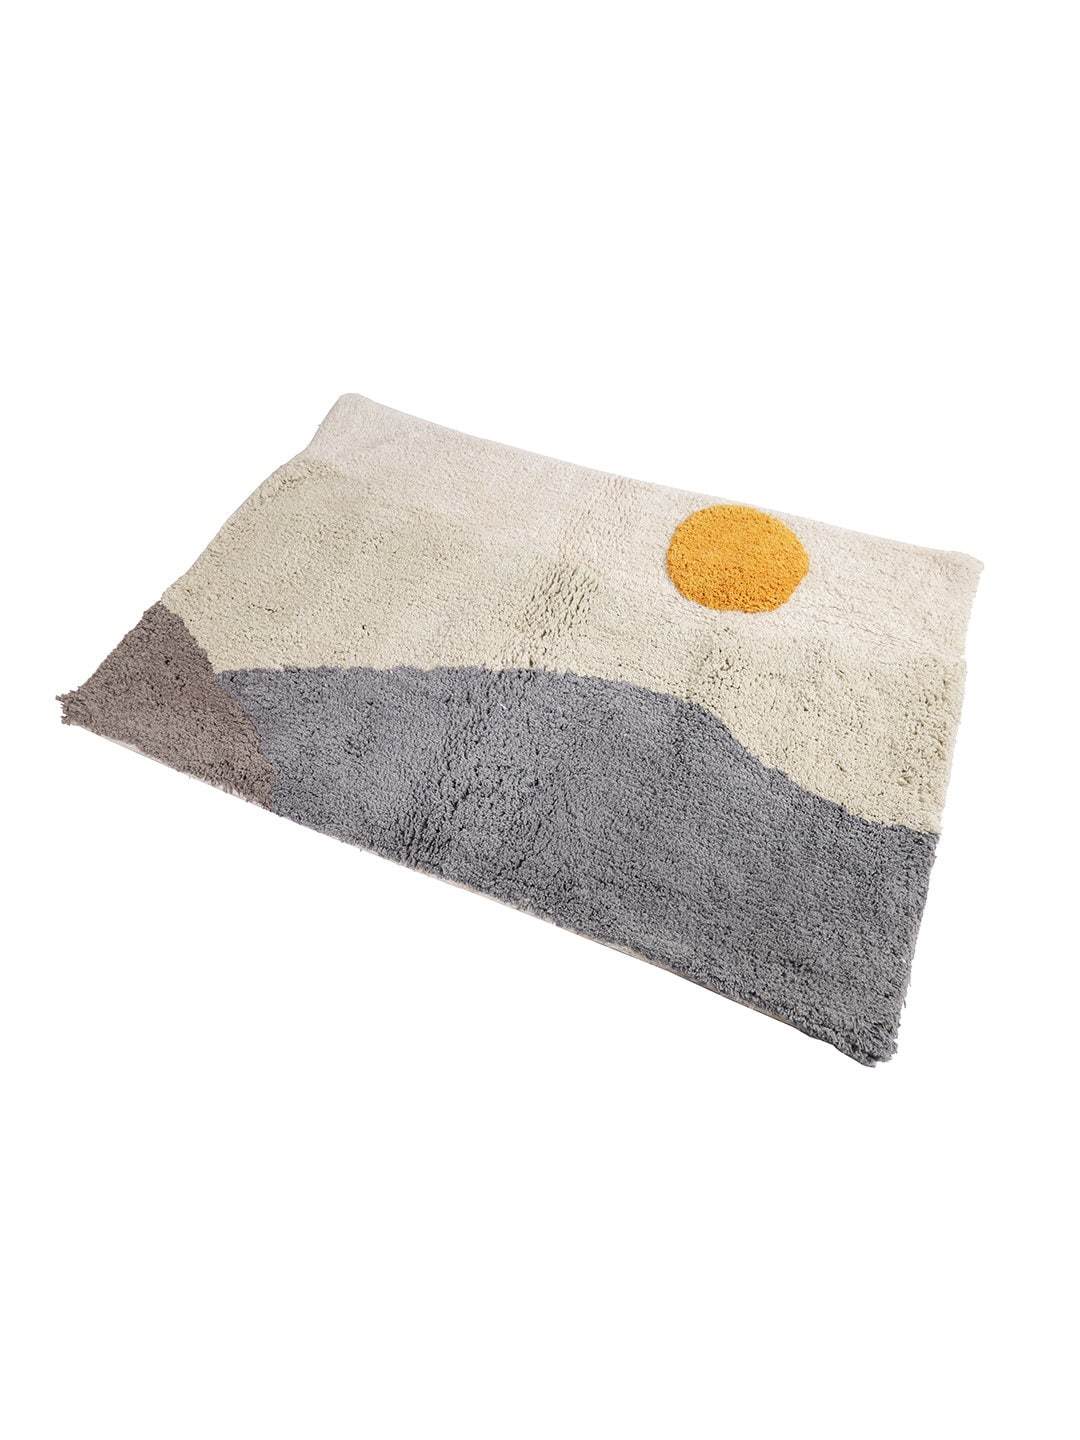 Hand Tufted Sun Rising Landscape Cotton Bath Mat For new year gift